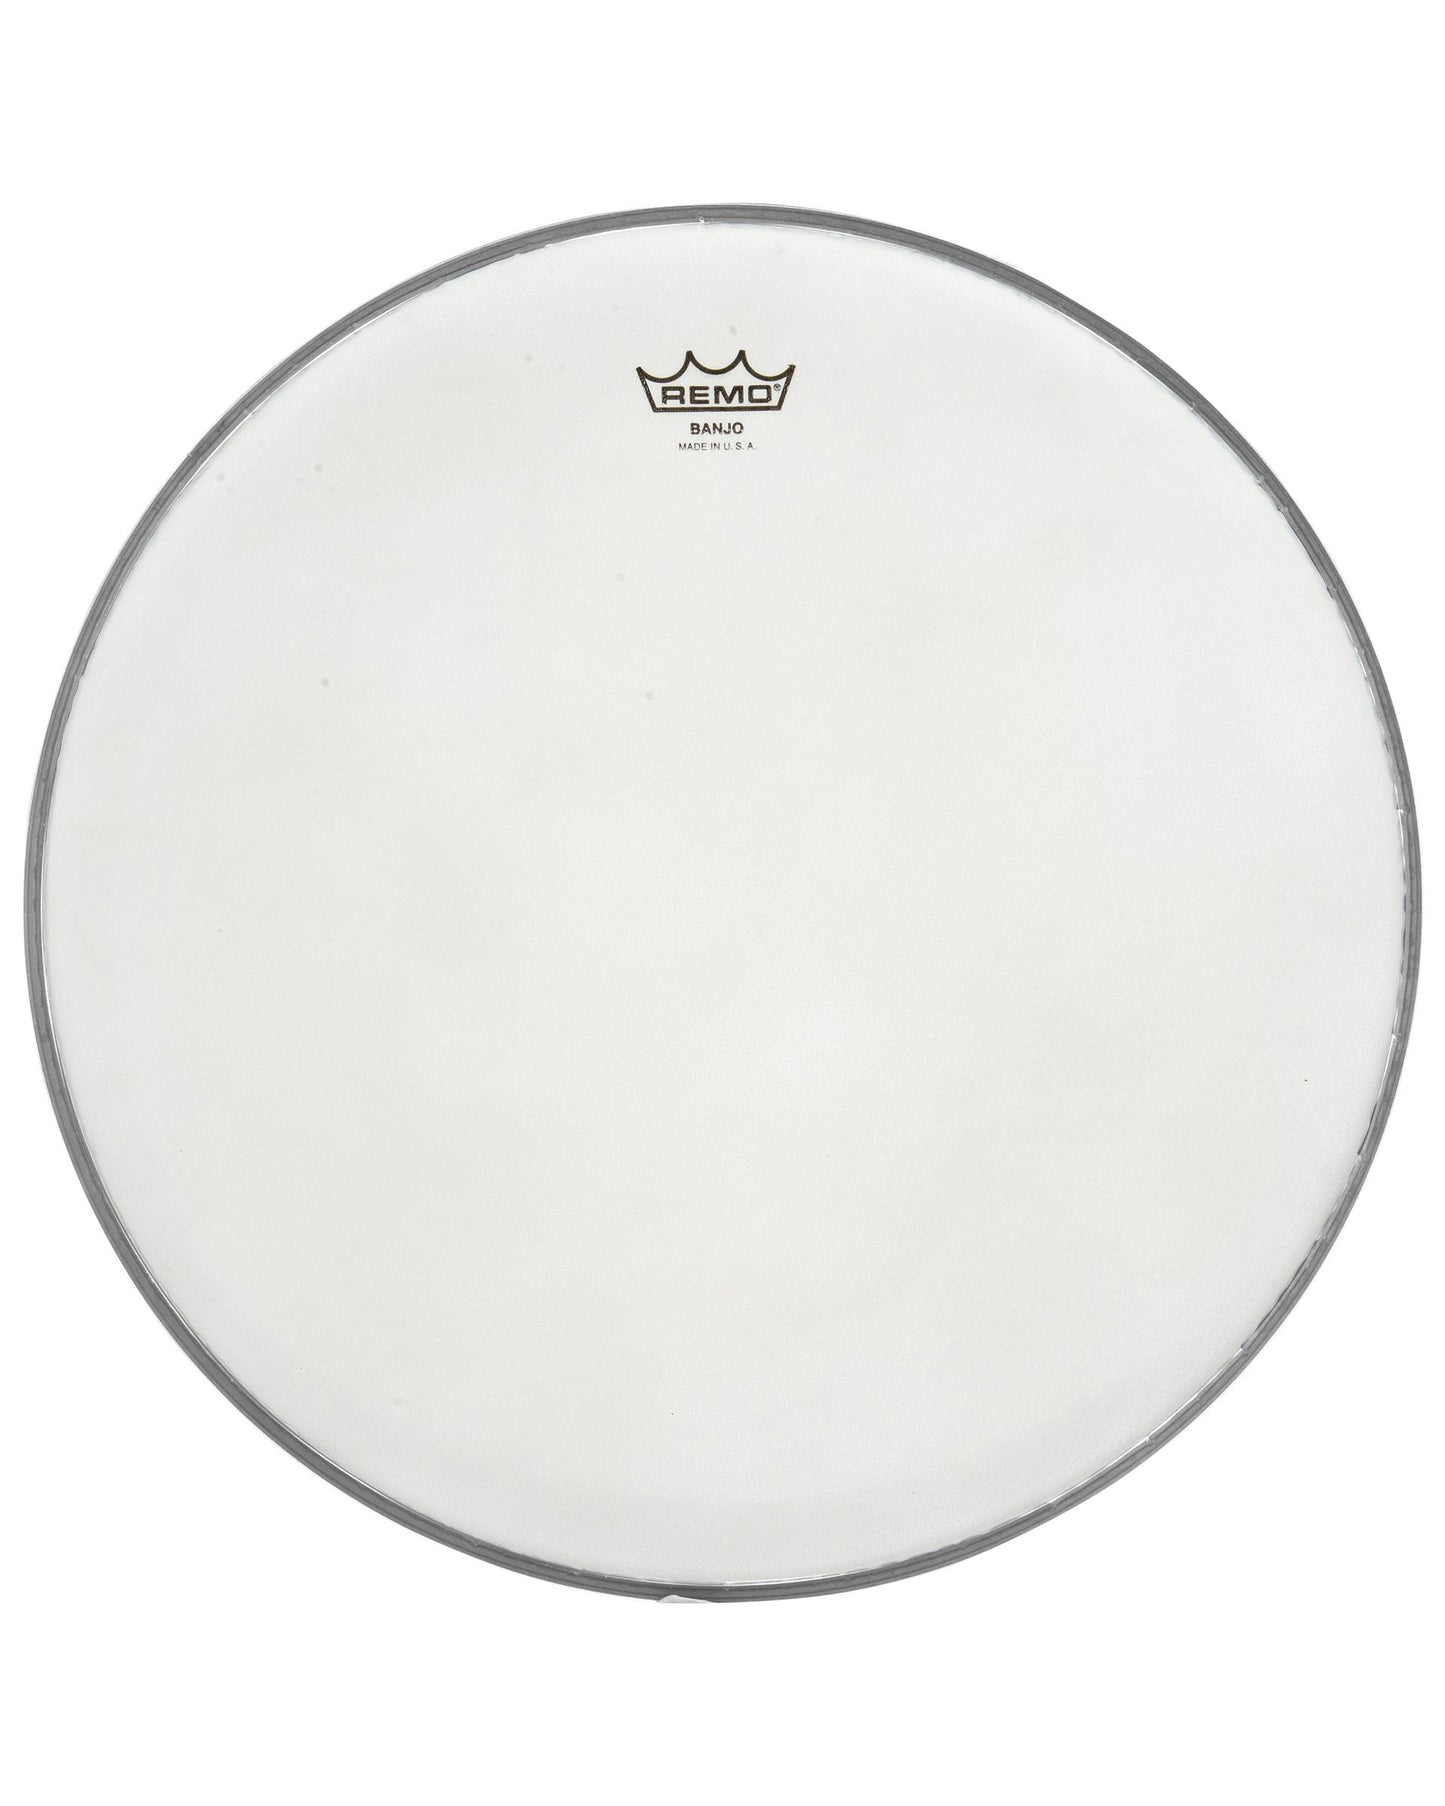 Image 1 of REMO FROSTED BOTTOM BANJO HEAD, 10 11/16 INCH DIAMETER, HIGH CROWN (1/2 INCH). - SKU# B1011-H-FRB : Product Type Accessories & Parts : Elderly Instruments